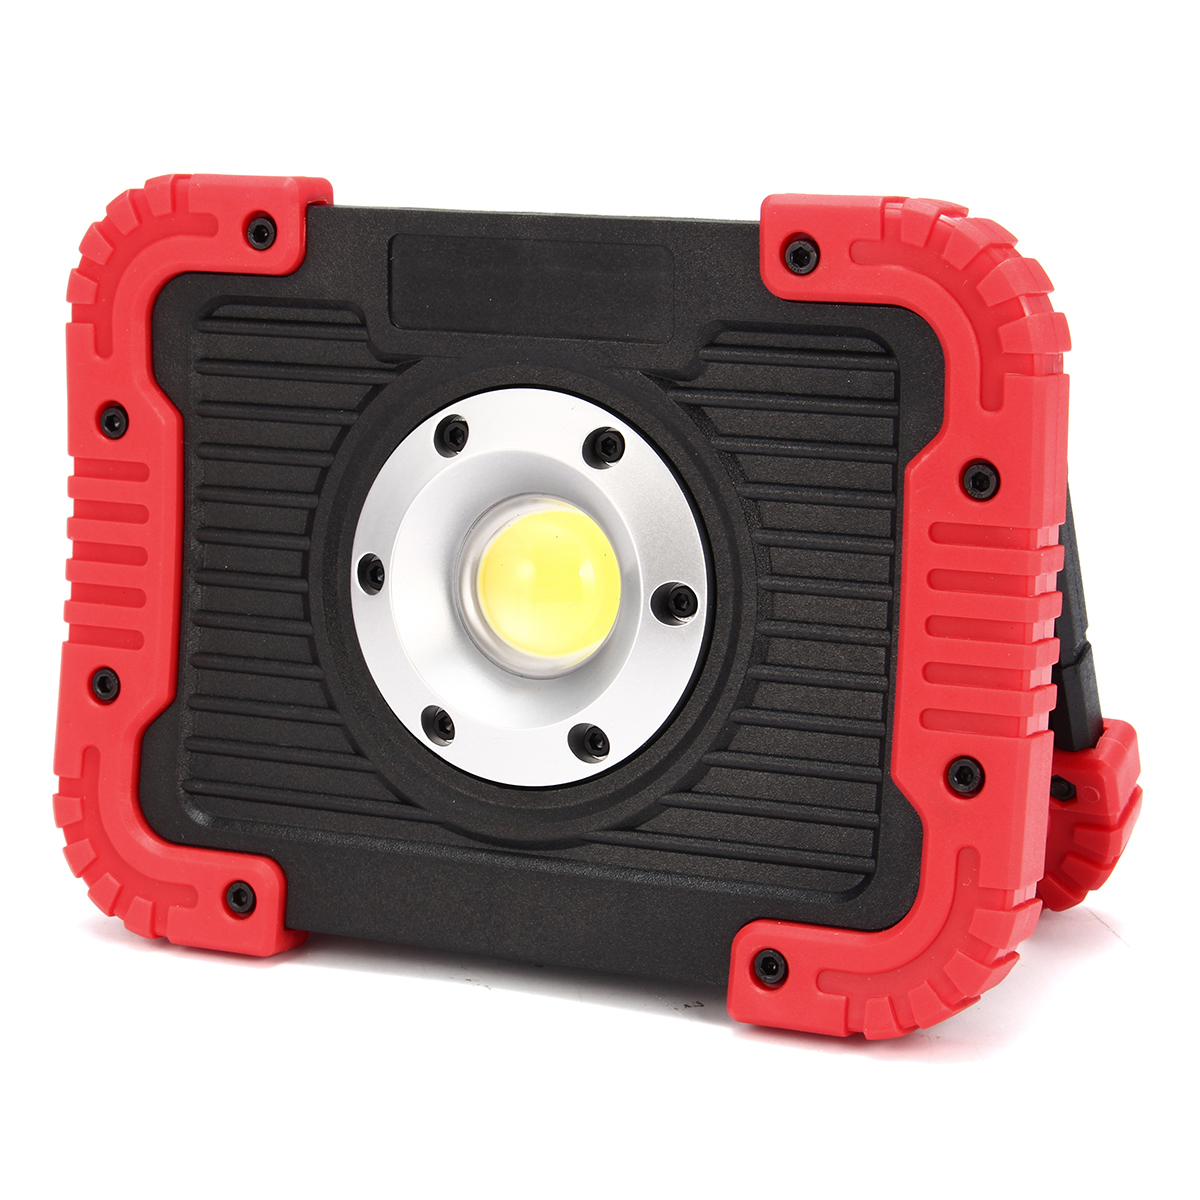 10W-750LM-Outdoor-Portable-COB-LED-Flood-Work-Light-USB-Rechargeable-Camping-Tent-Lantern-1402812